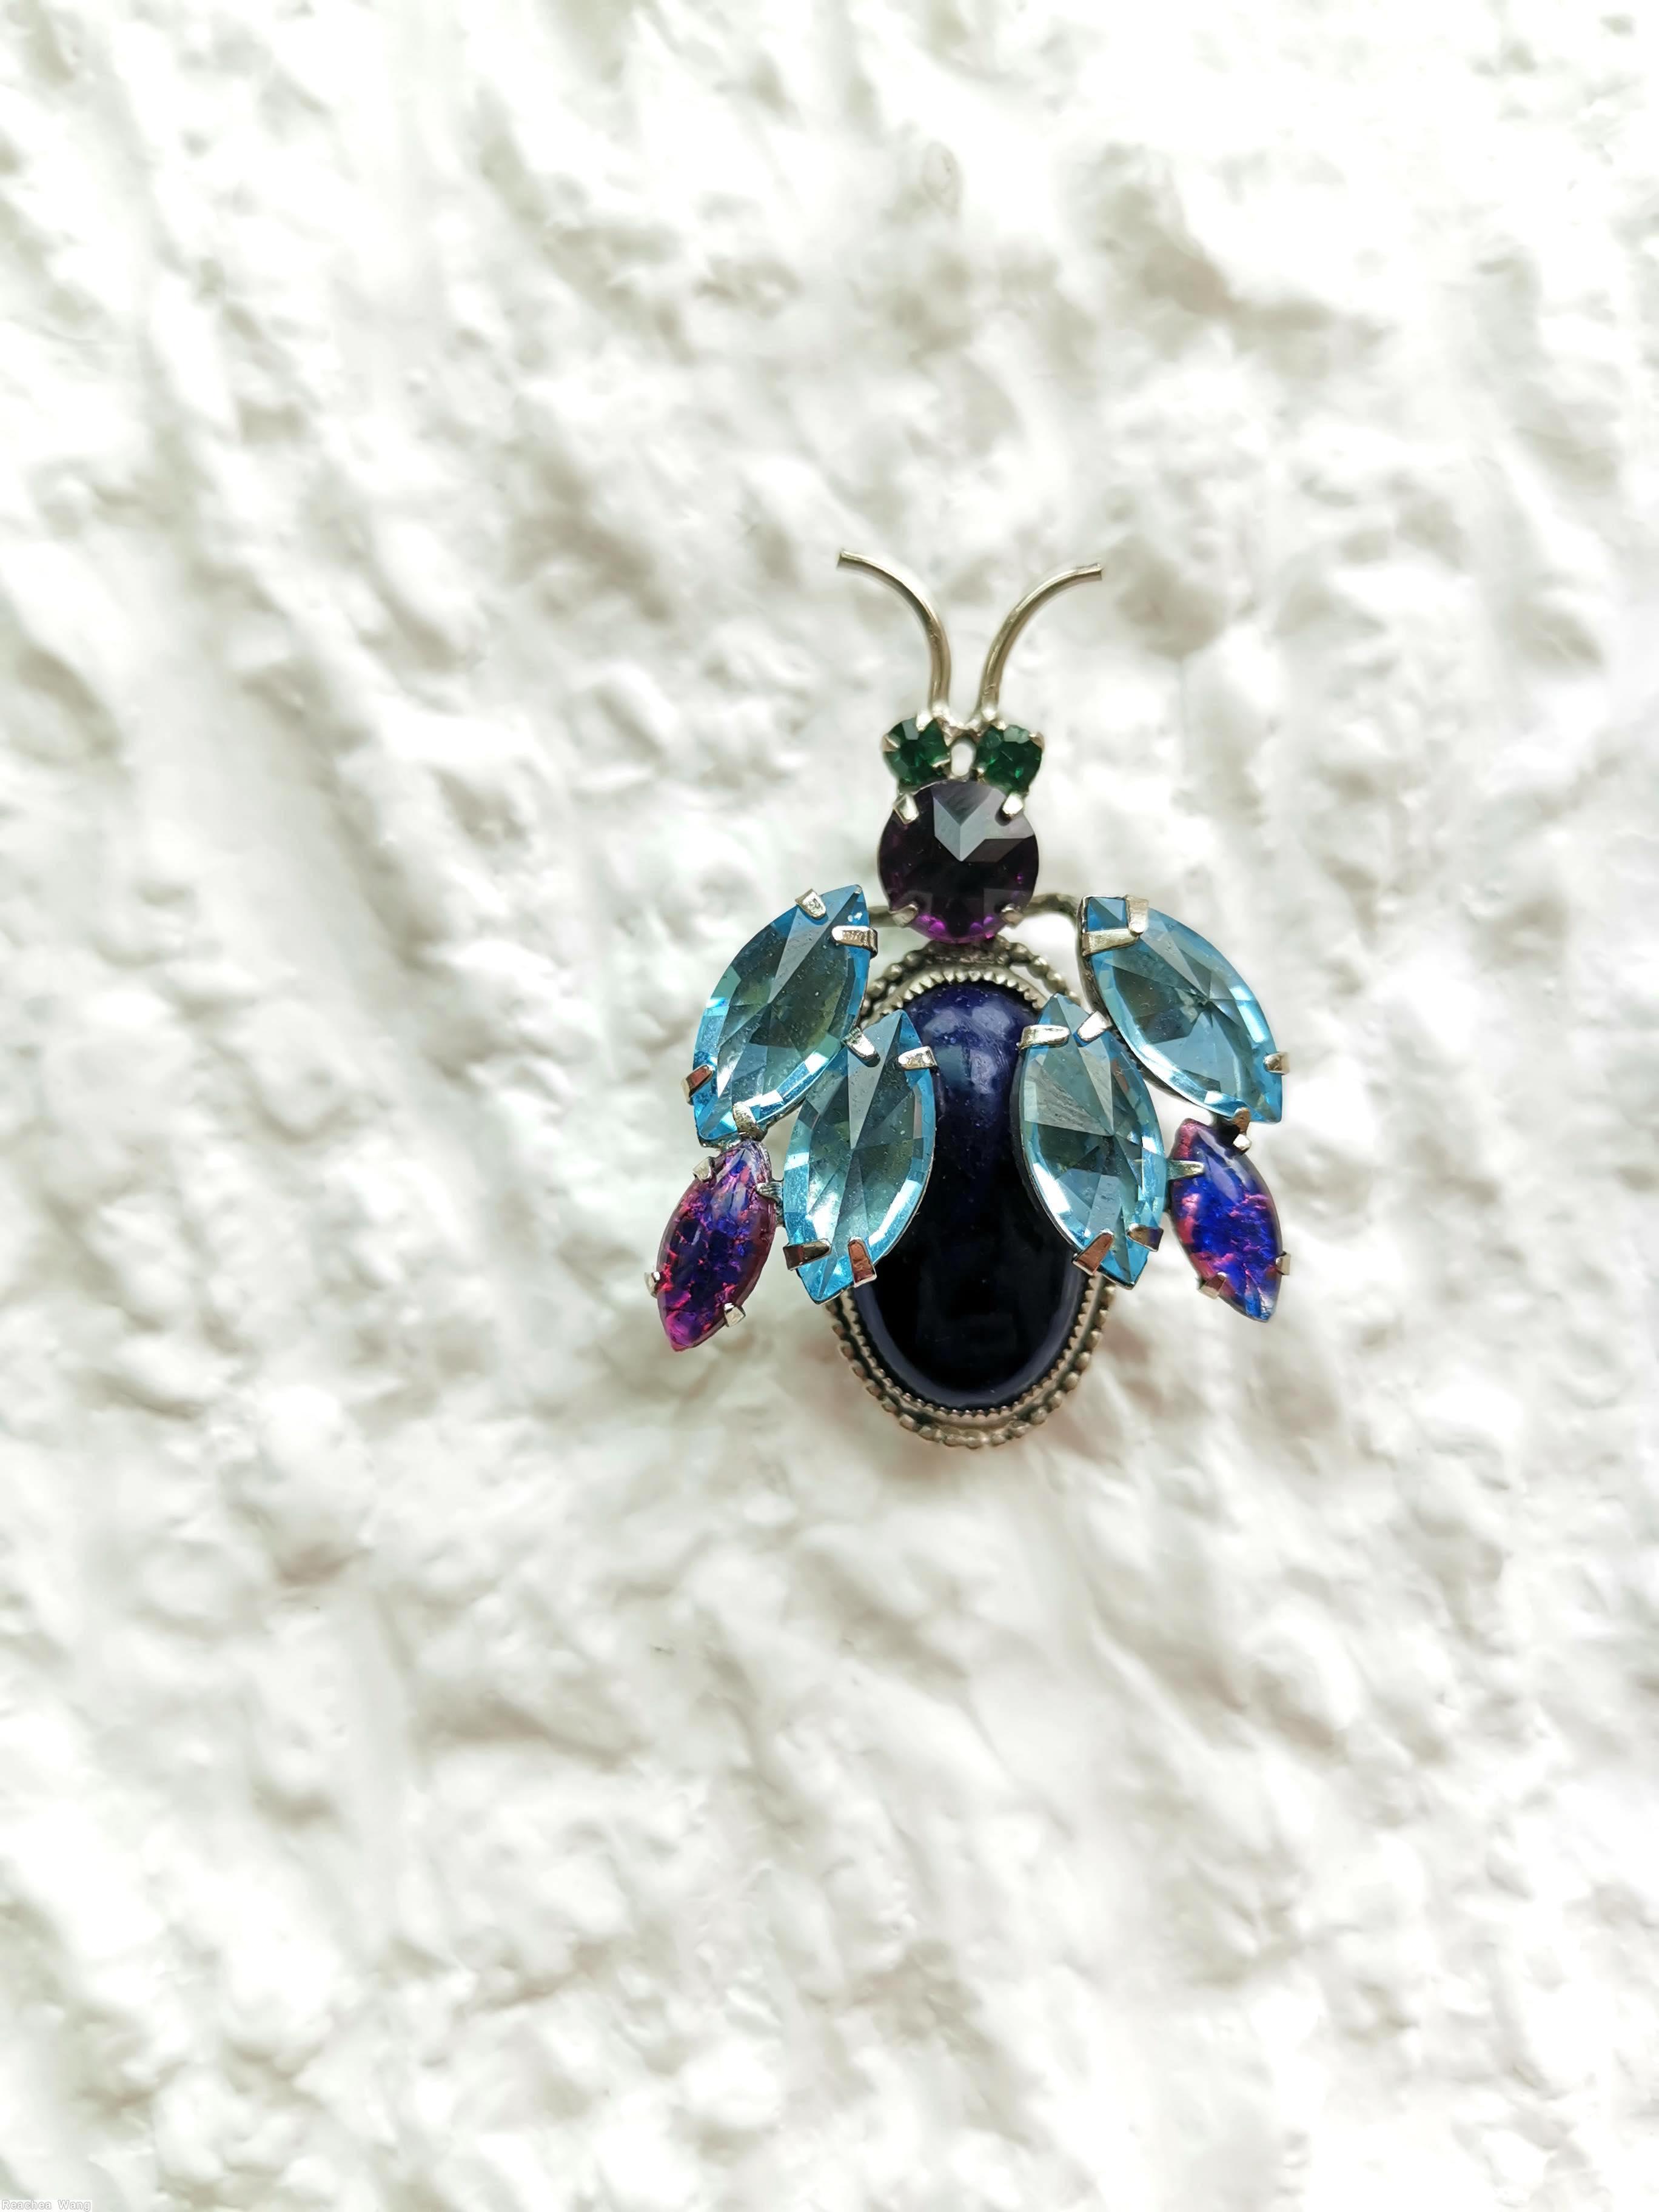 Schreiner large oval body bug 2 large navette wing 4 antenna 3 eye 4 leg clear ice blue faceted navette large jet oval cab pink dot lapis navette jewelry